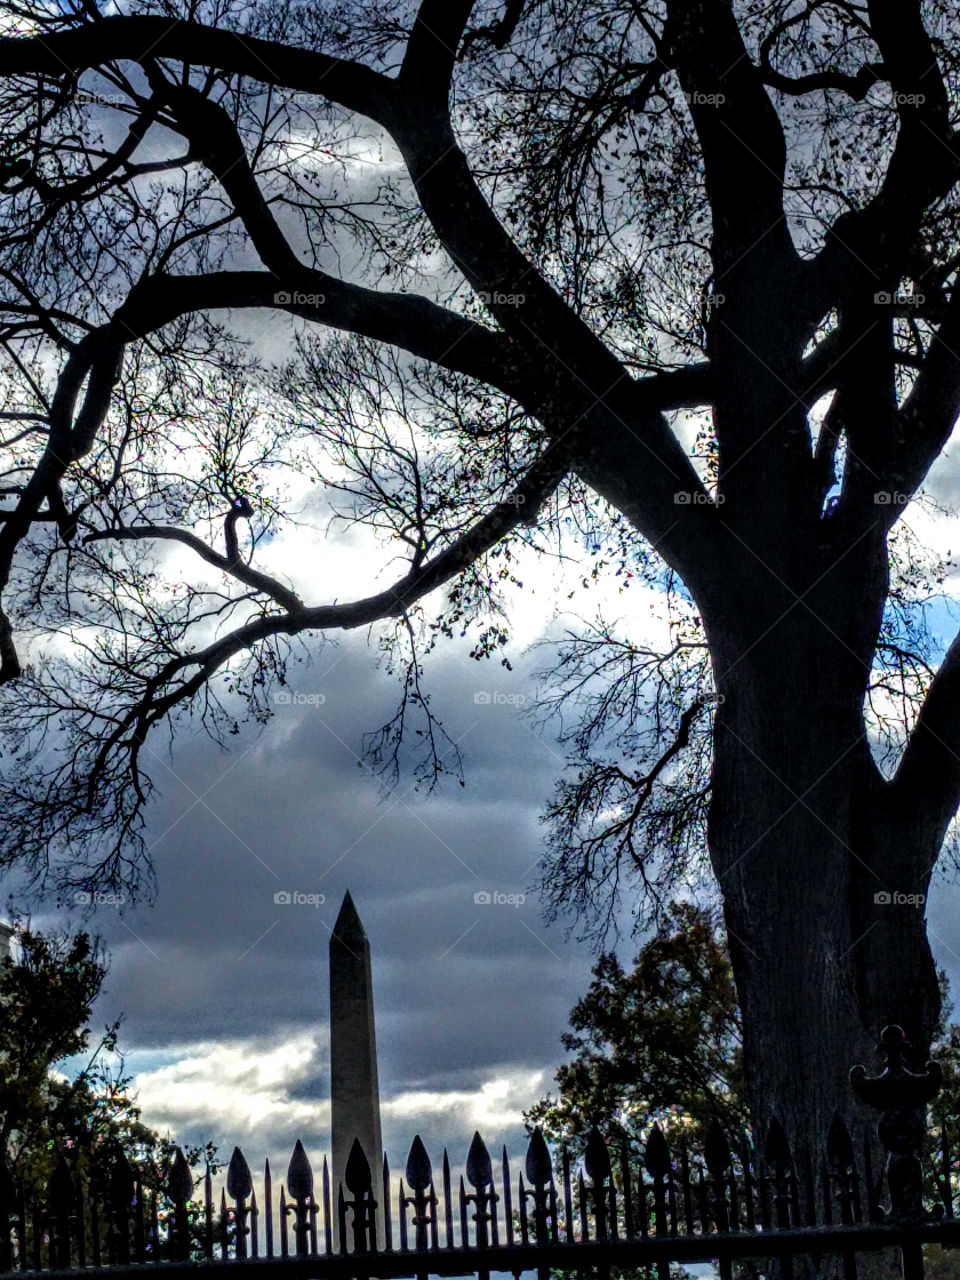 Pic of Washington Monument from The White house